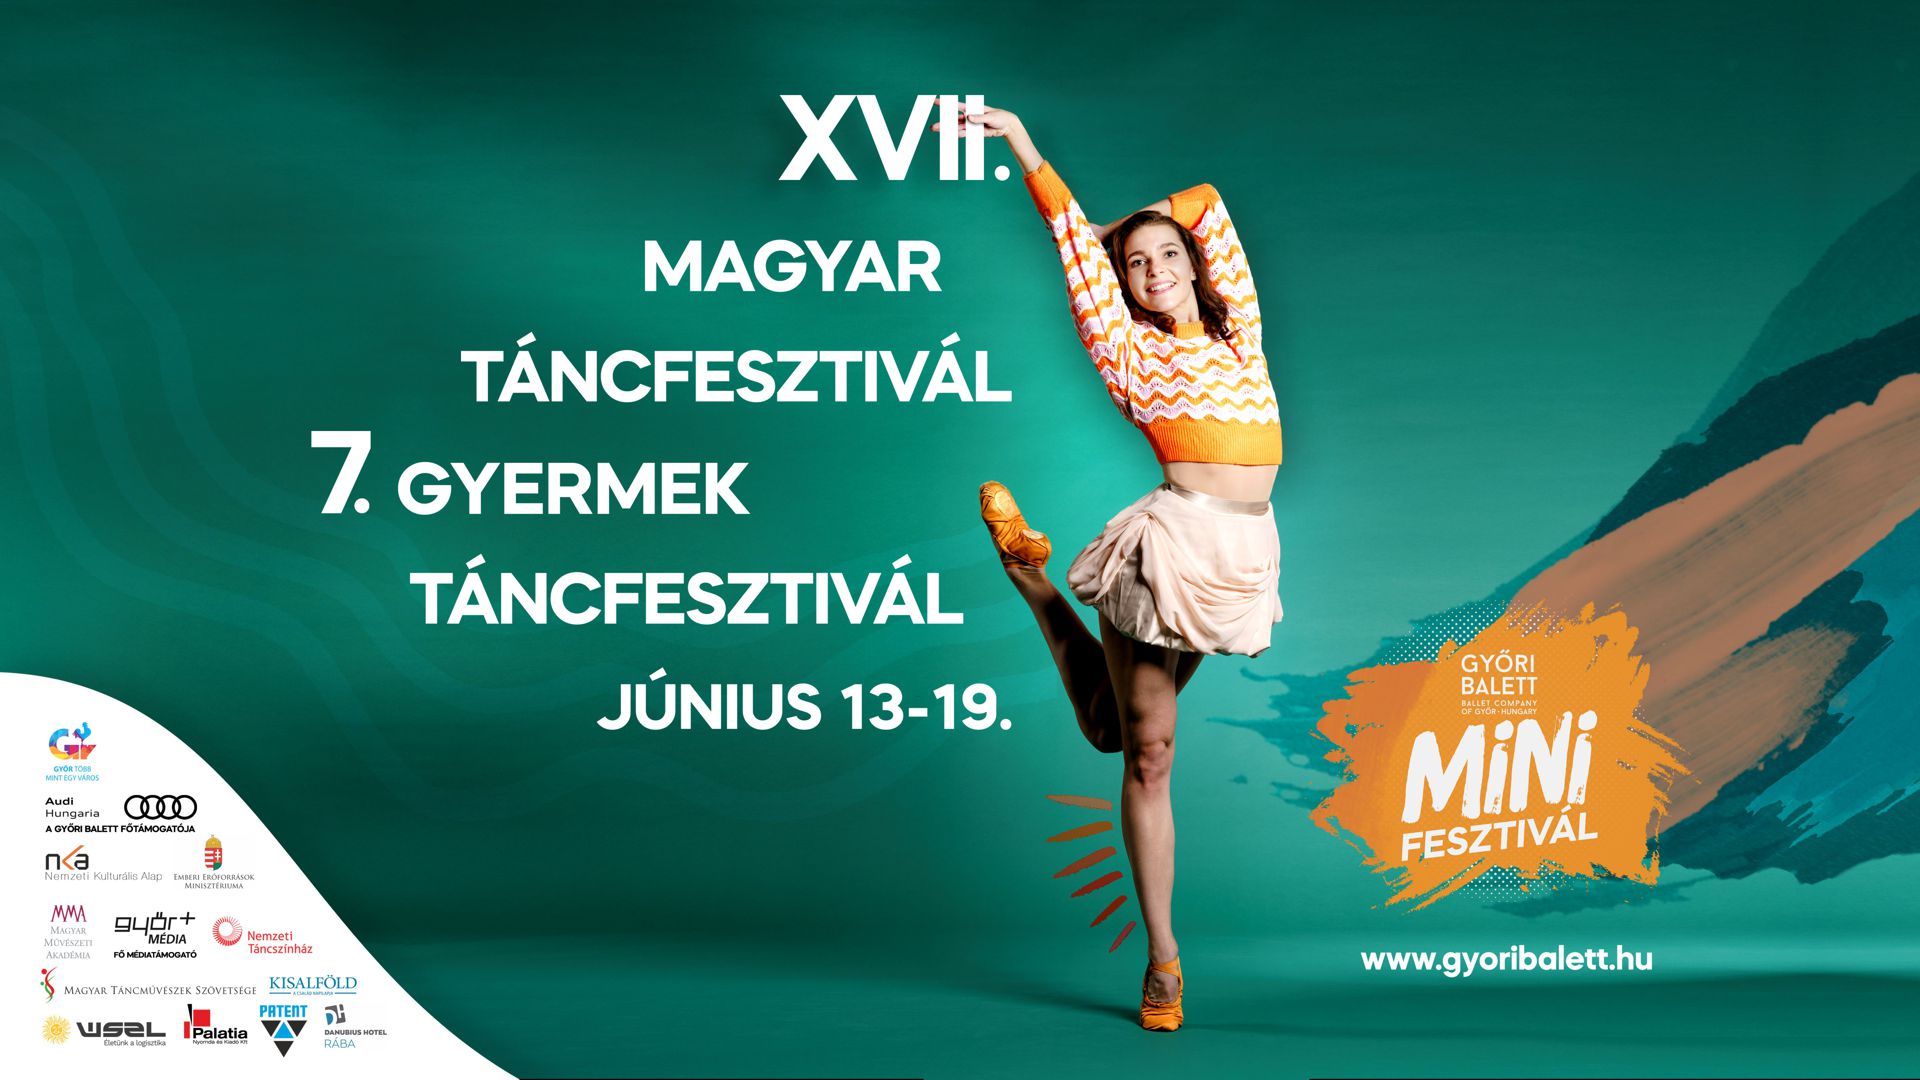 Young Dancers Can Display Their Talent at Hungarian Ballet Grand Prix